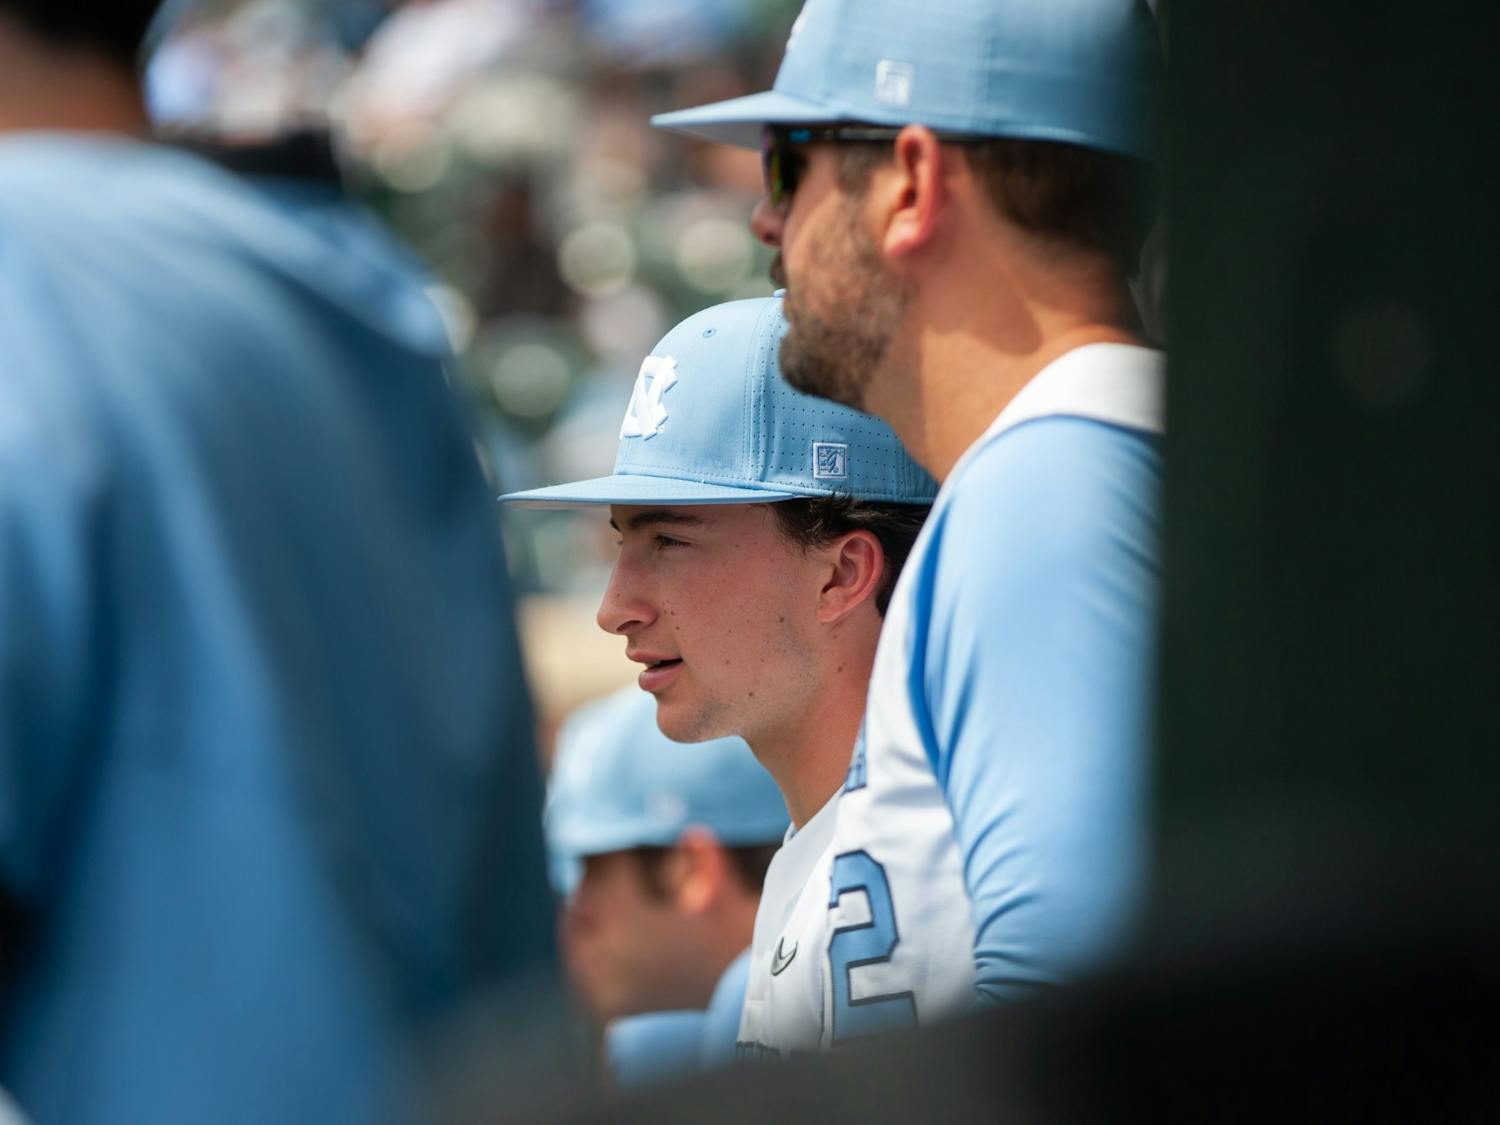 UNC freshman infielder and right-handed pitcher Justin Szestowicki (14) watching his team play from the sideline during a baseball game against Georgia Tech on Saturday, April 16, 2022, at Boshamer Stadium. UNC won 10-5.